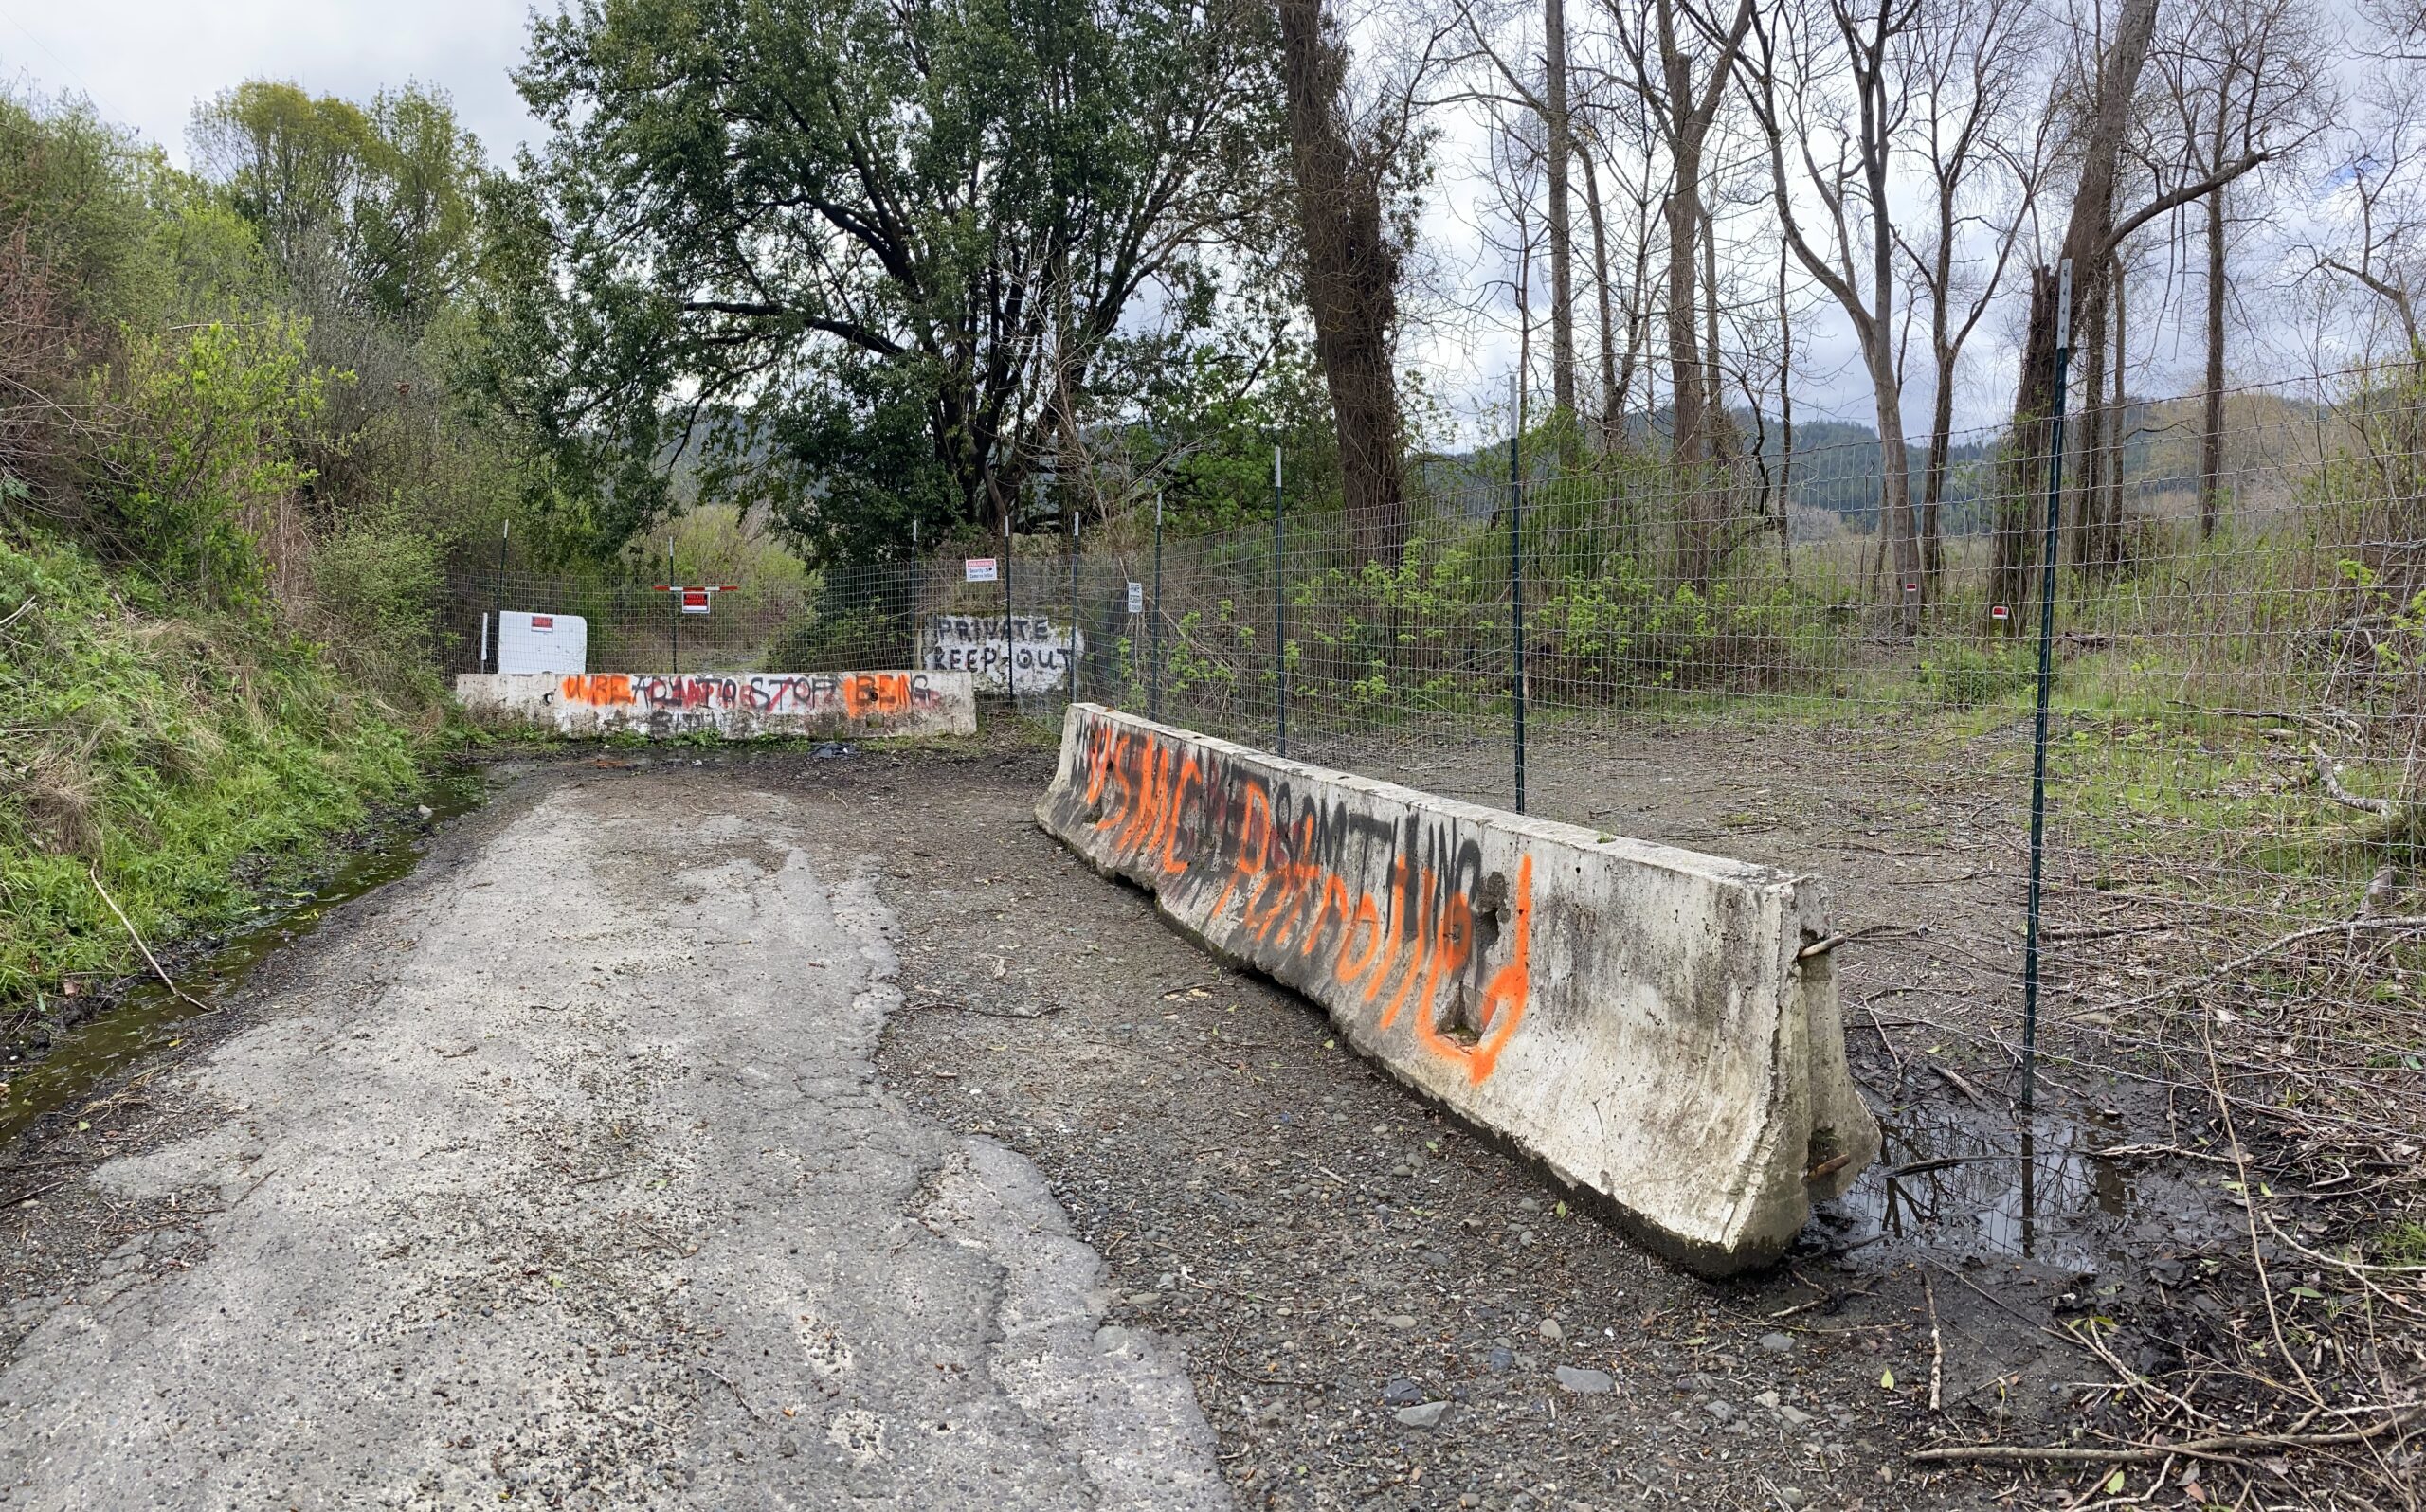 Action Alert: Protect Public Access to Fisher Road